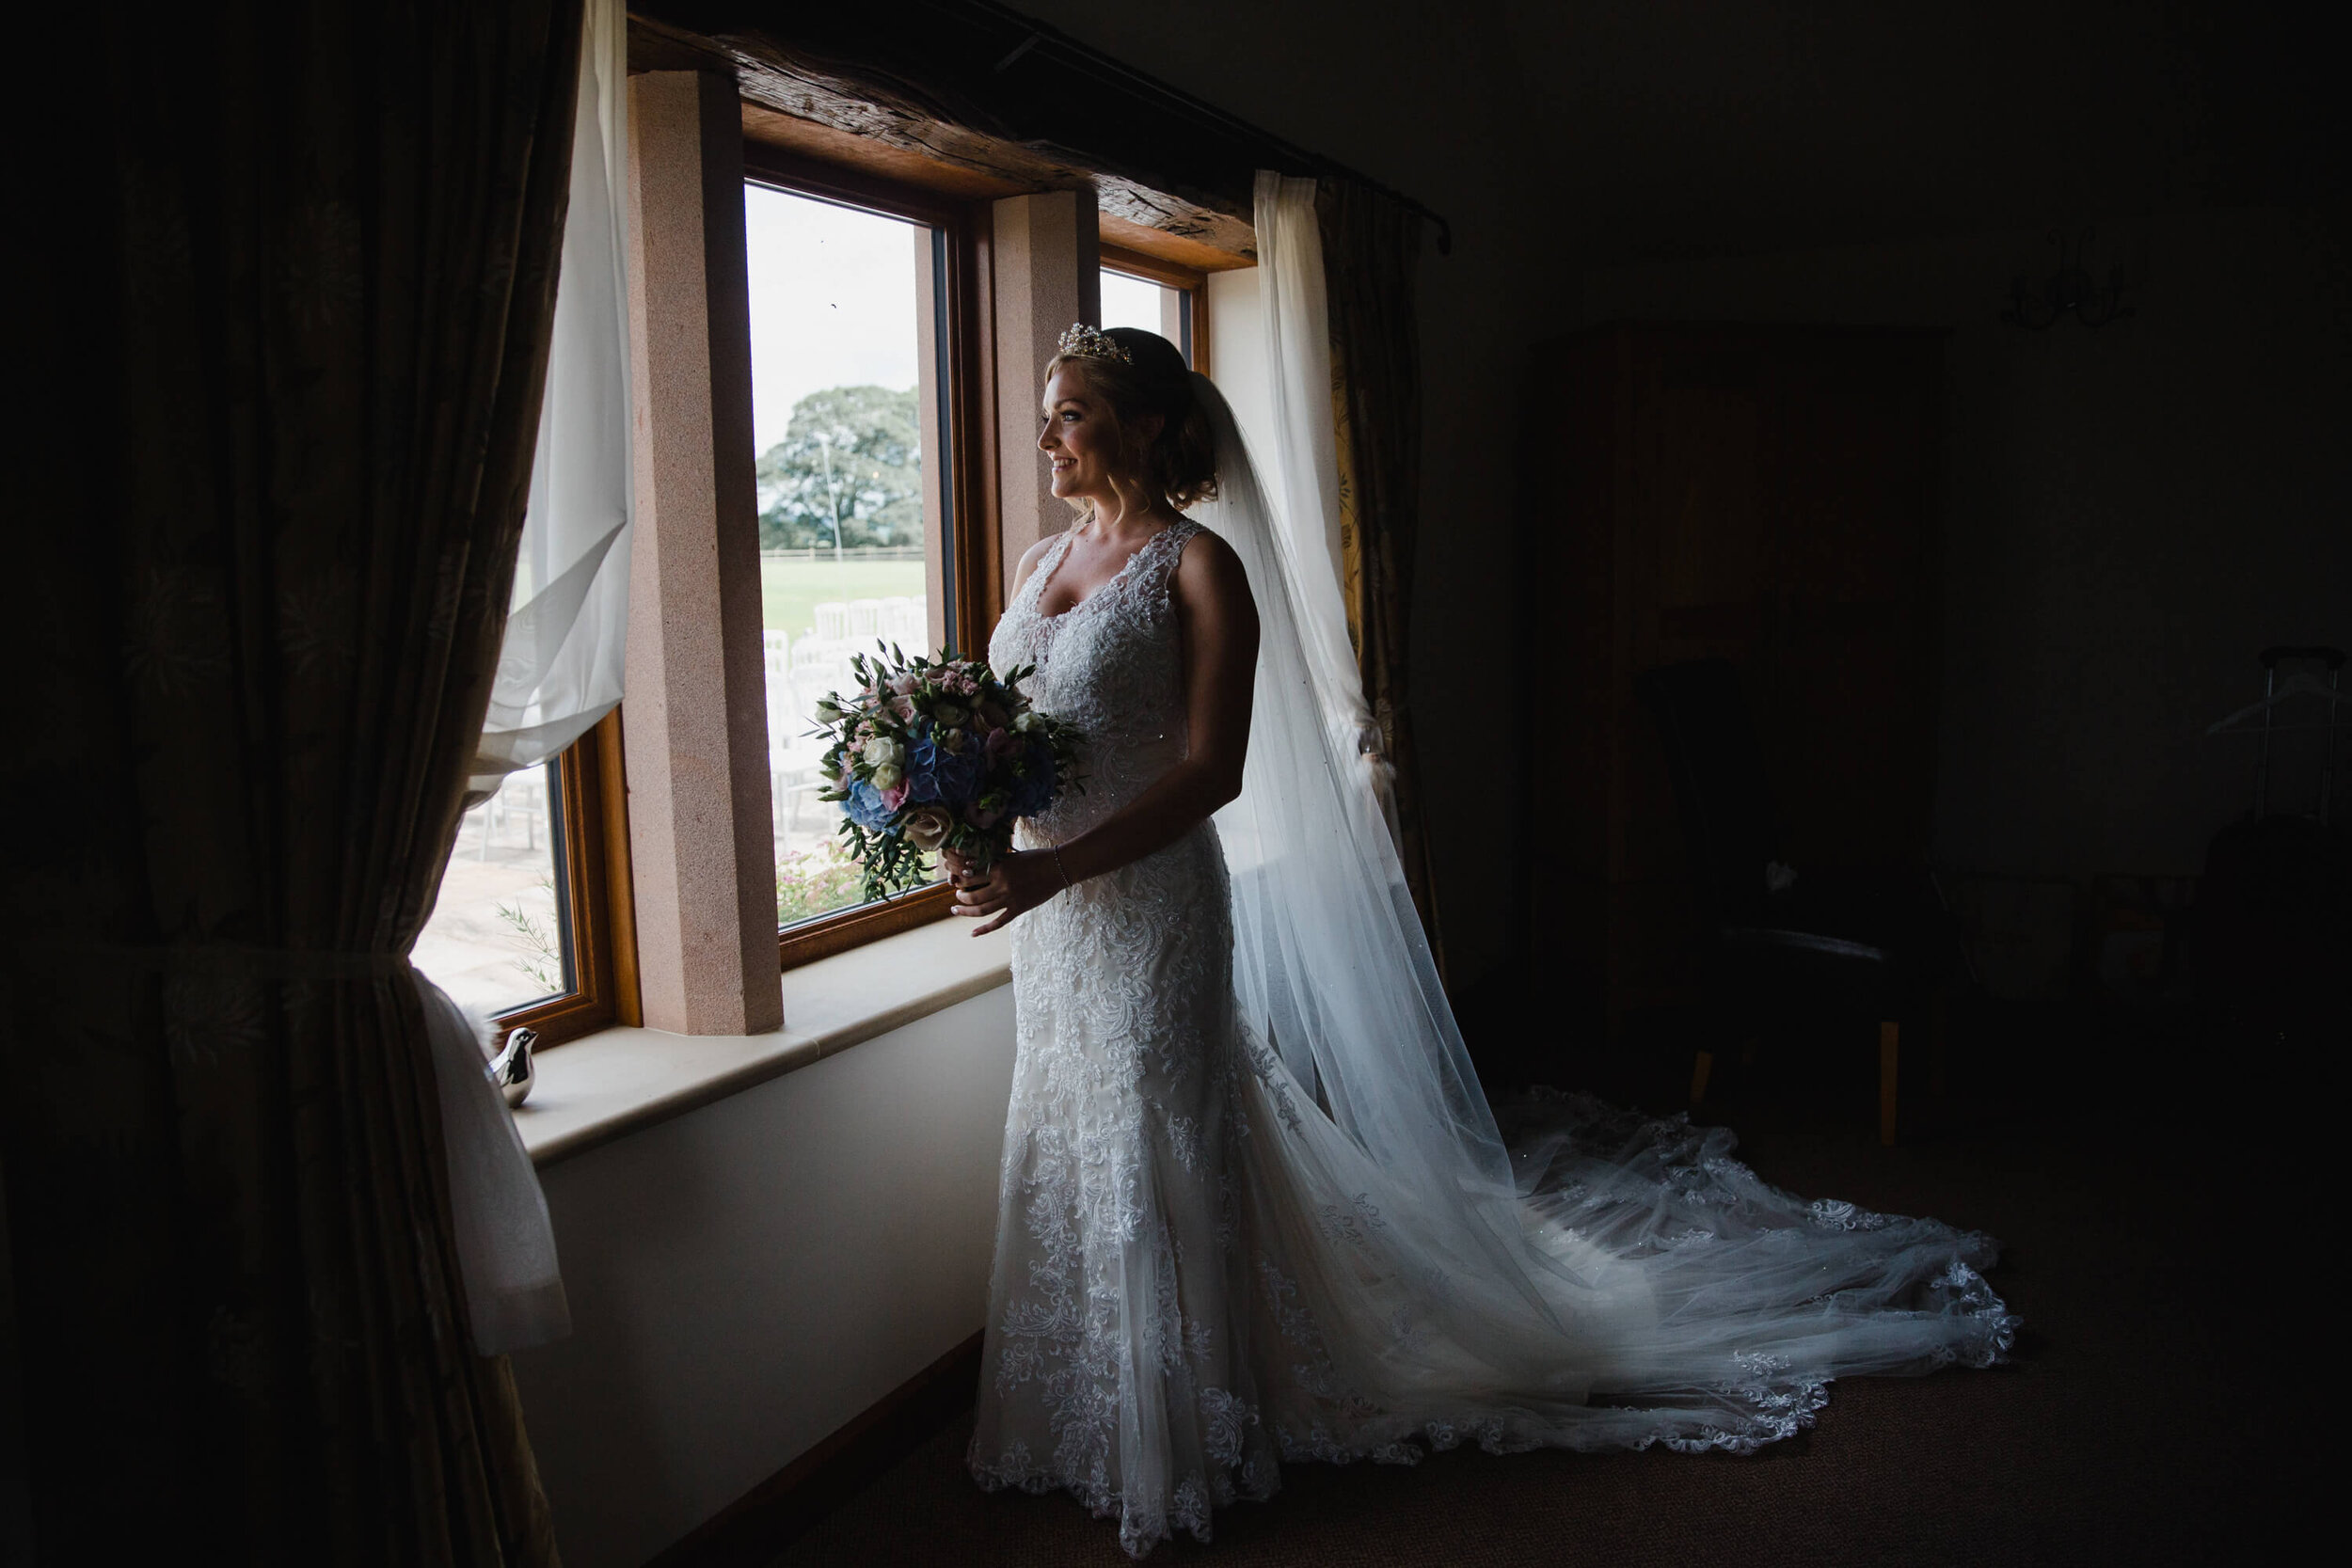 low light exposure portrait of bride looking out from building window